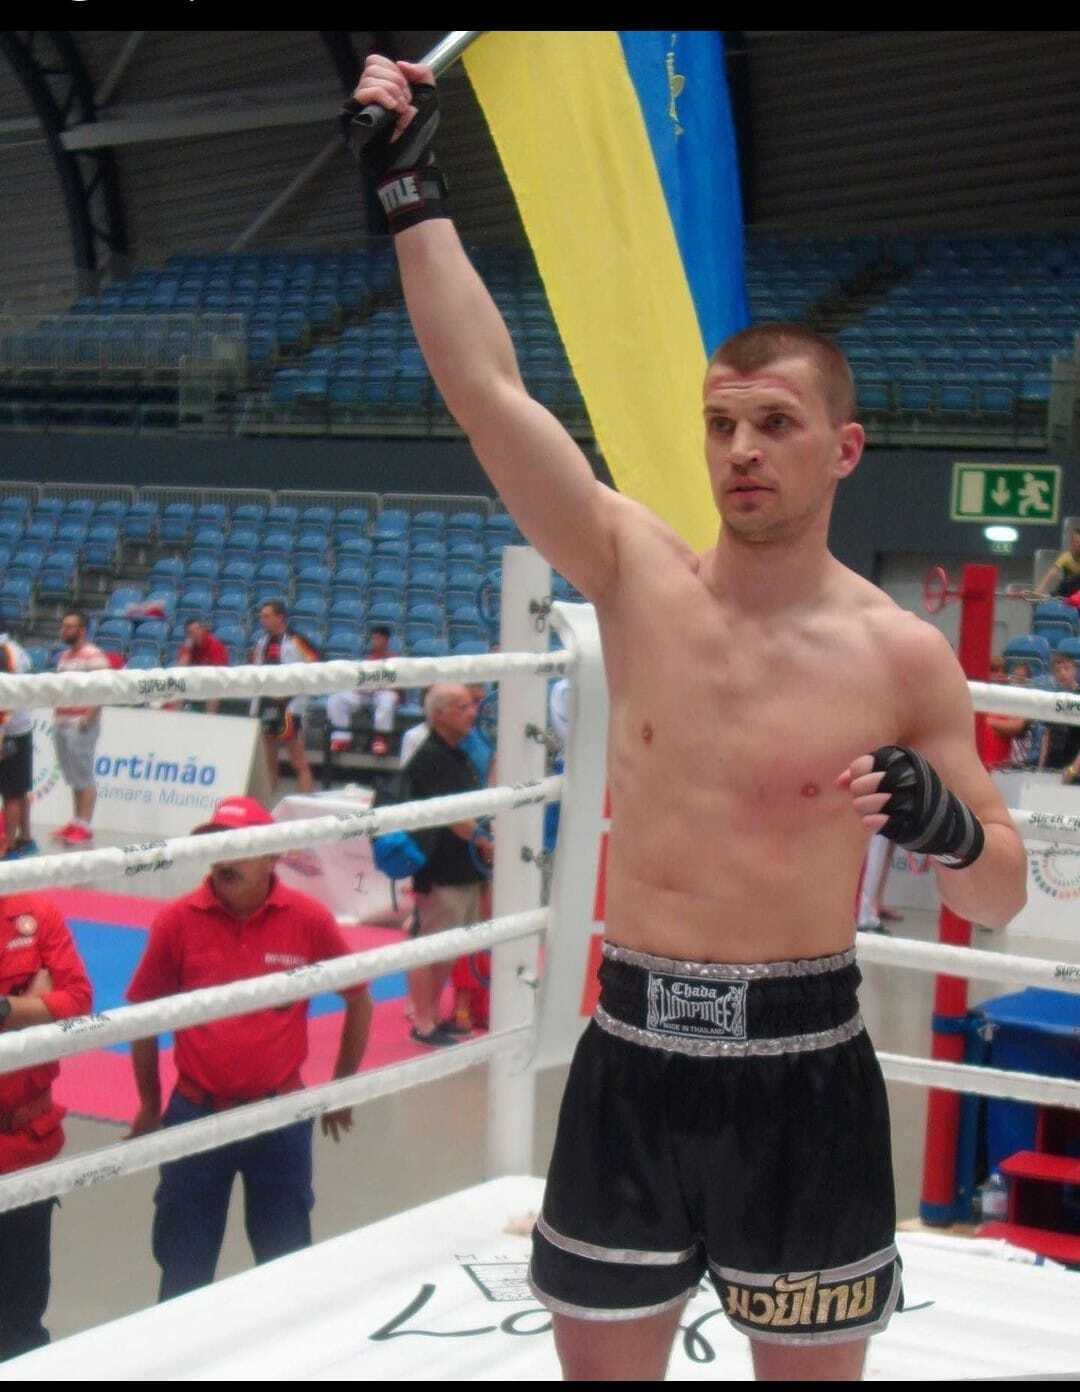 World champion who hit a mine dies in intensive care in Dnipro: doctors fought for 10 days to save his life